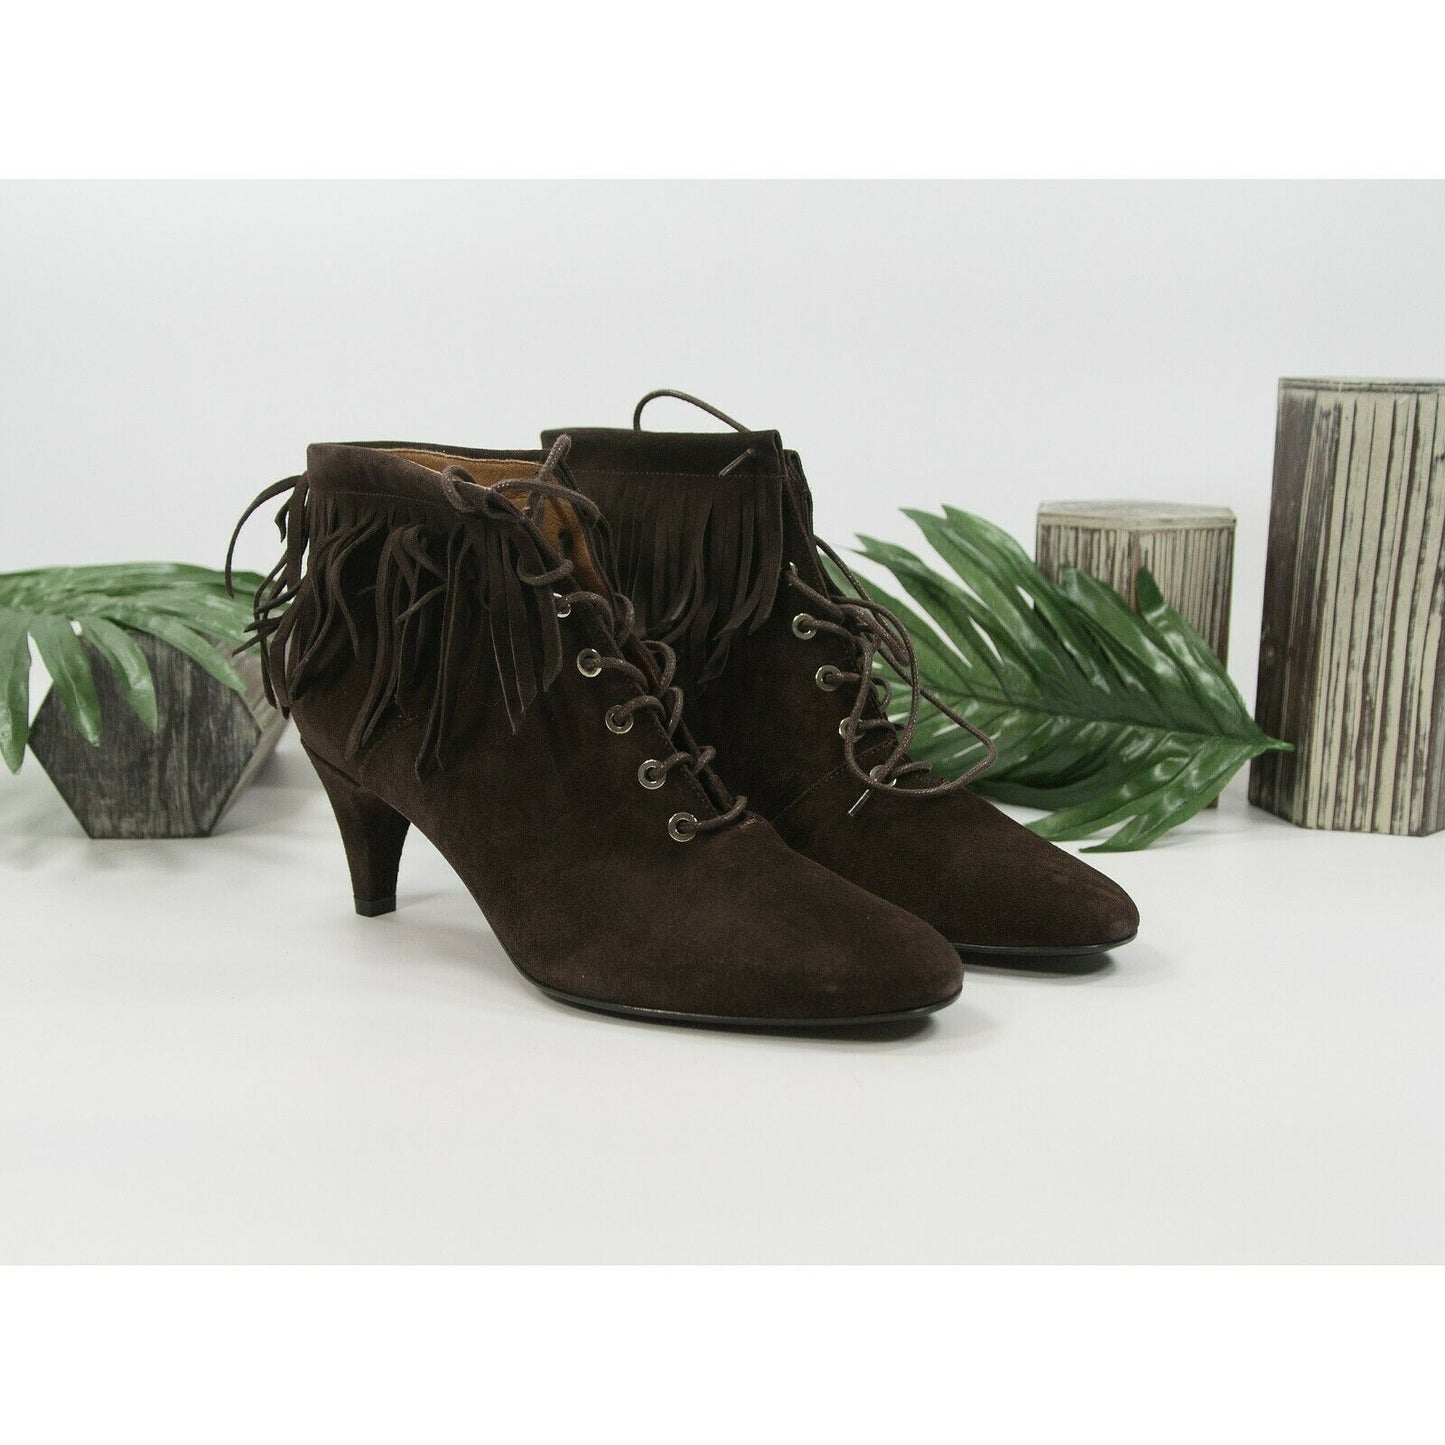 Maje Marron Brown Suede Kitten Heel Lace Up Fringe Ankle Boot Shoes Sz 40 10